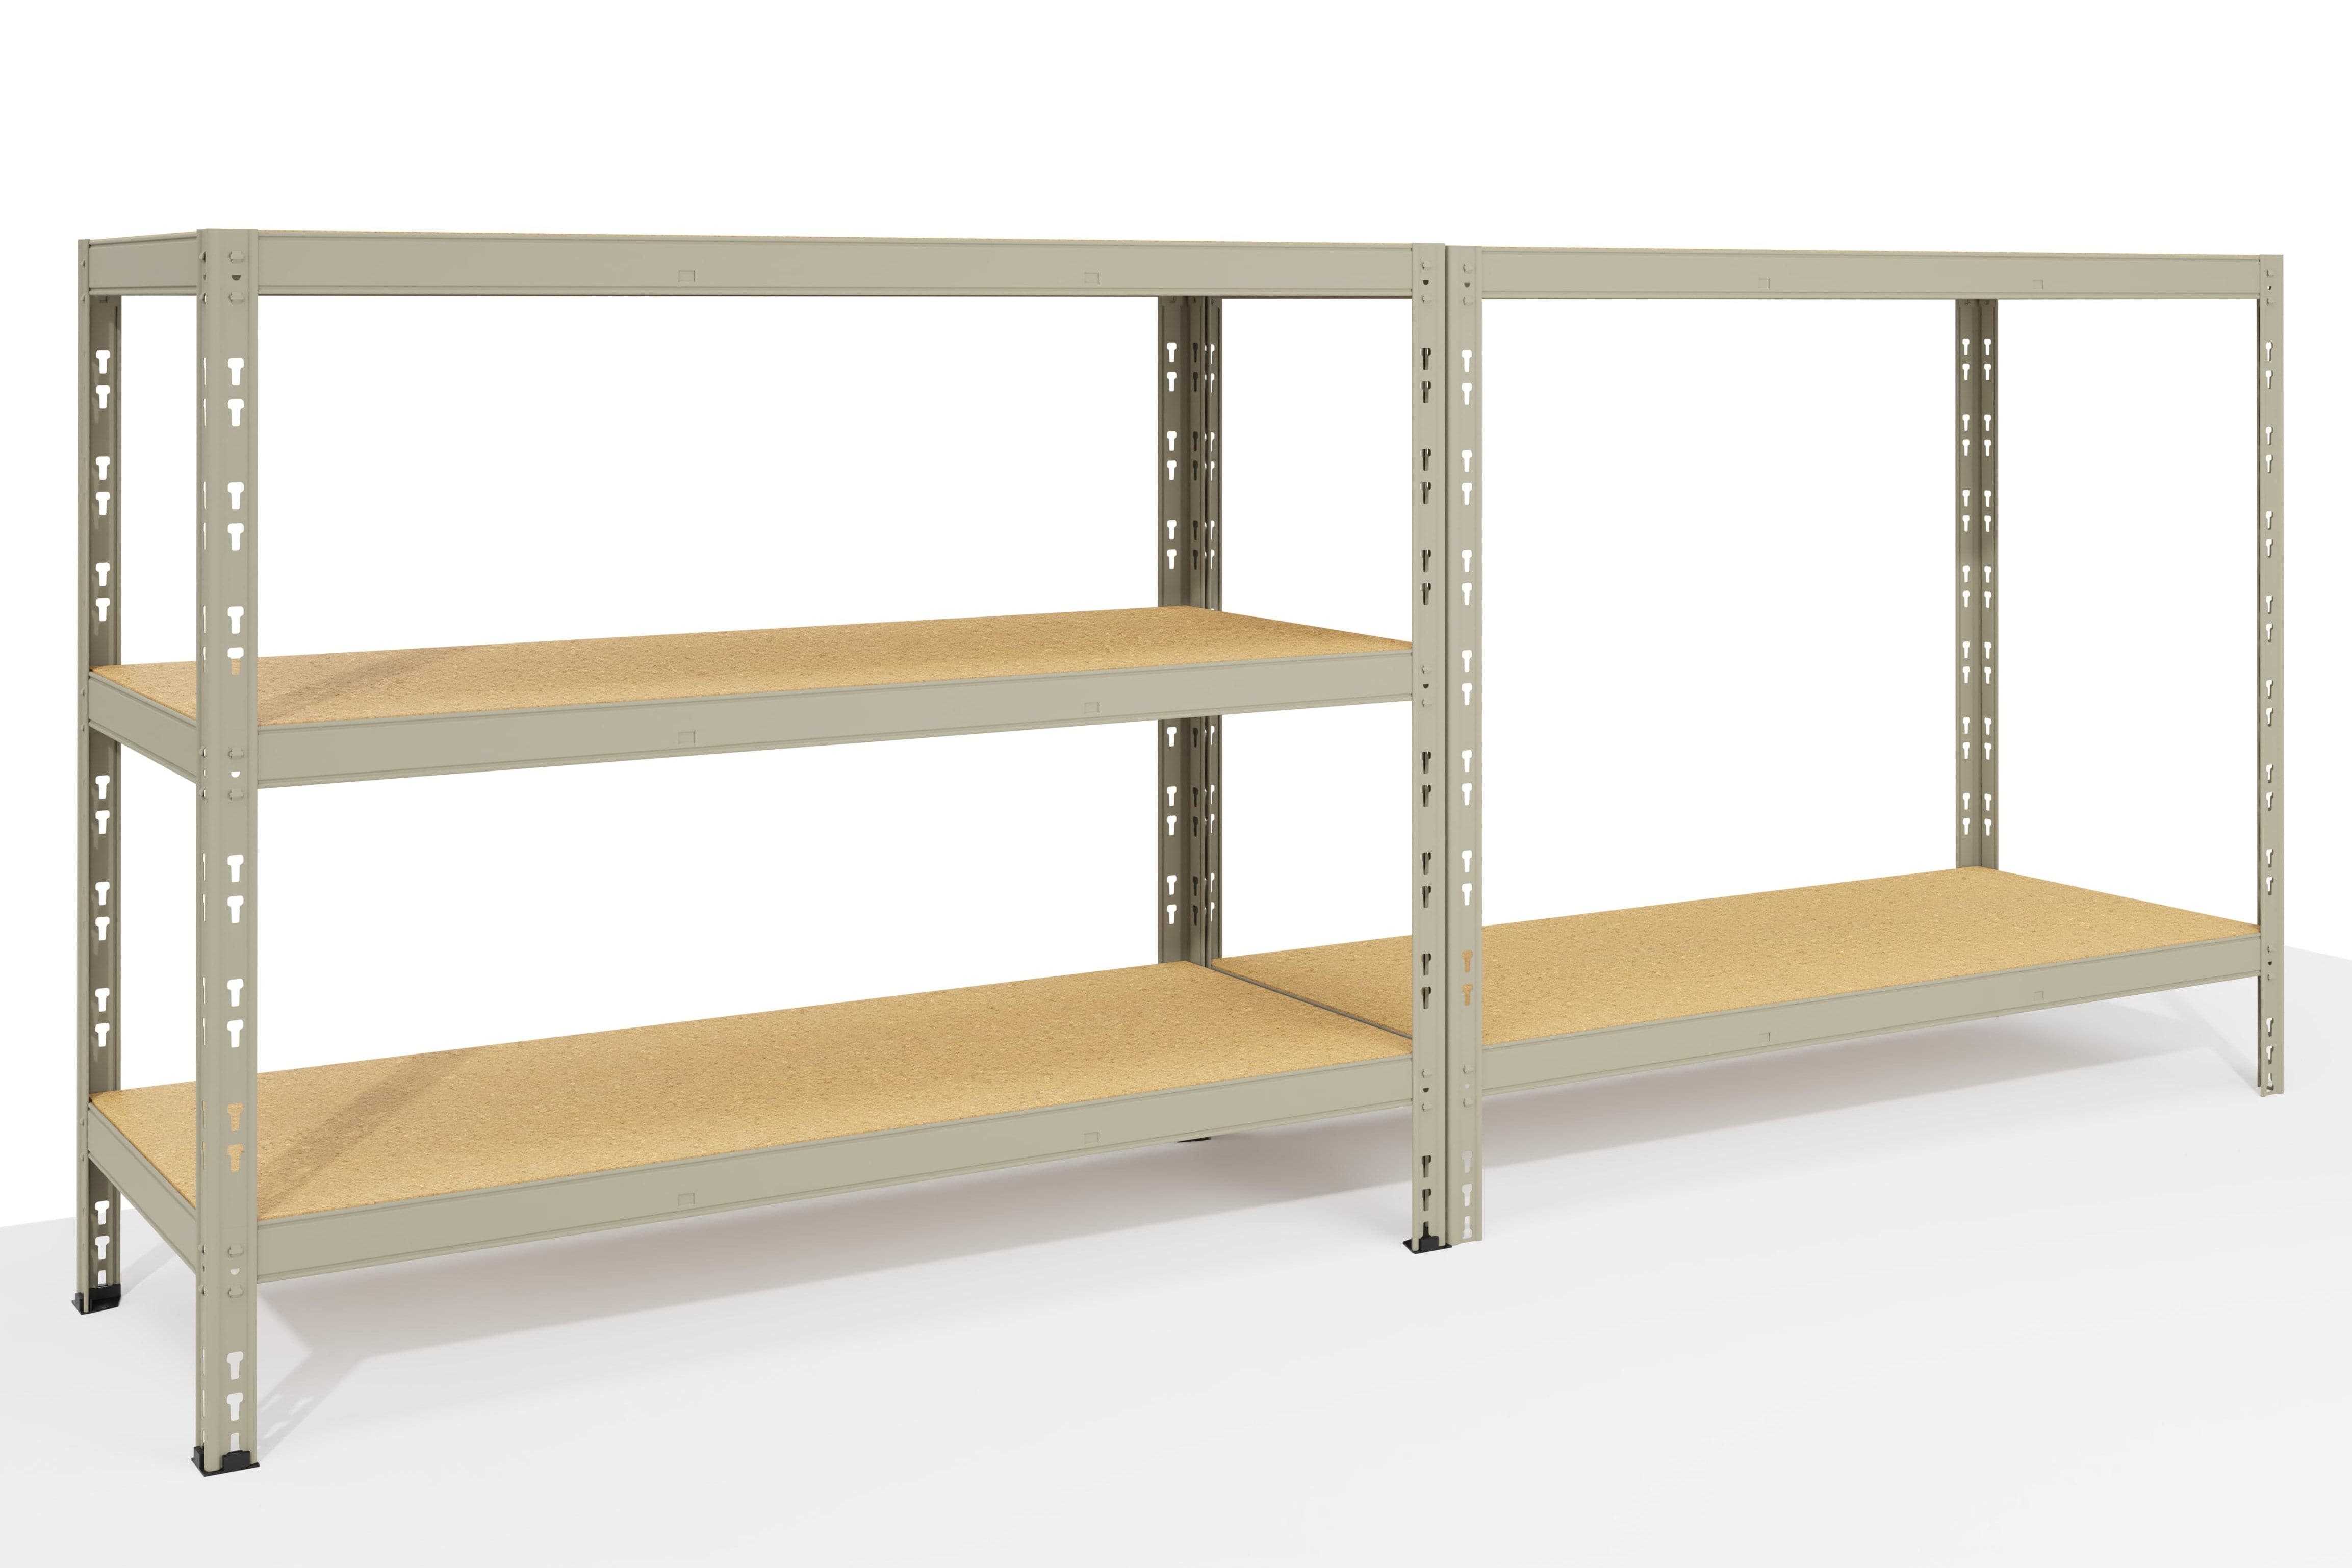 .

Metal and Wood Shelving L120XP50XH200CM, 300 KG, 5 Grey Spaceo Shelves